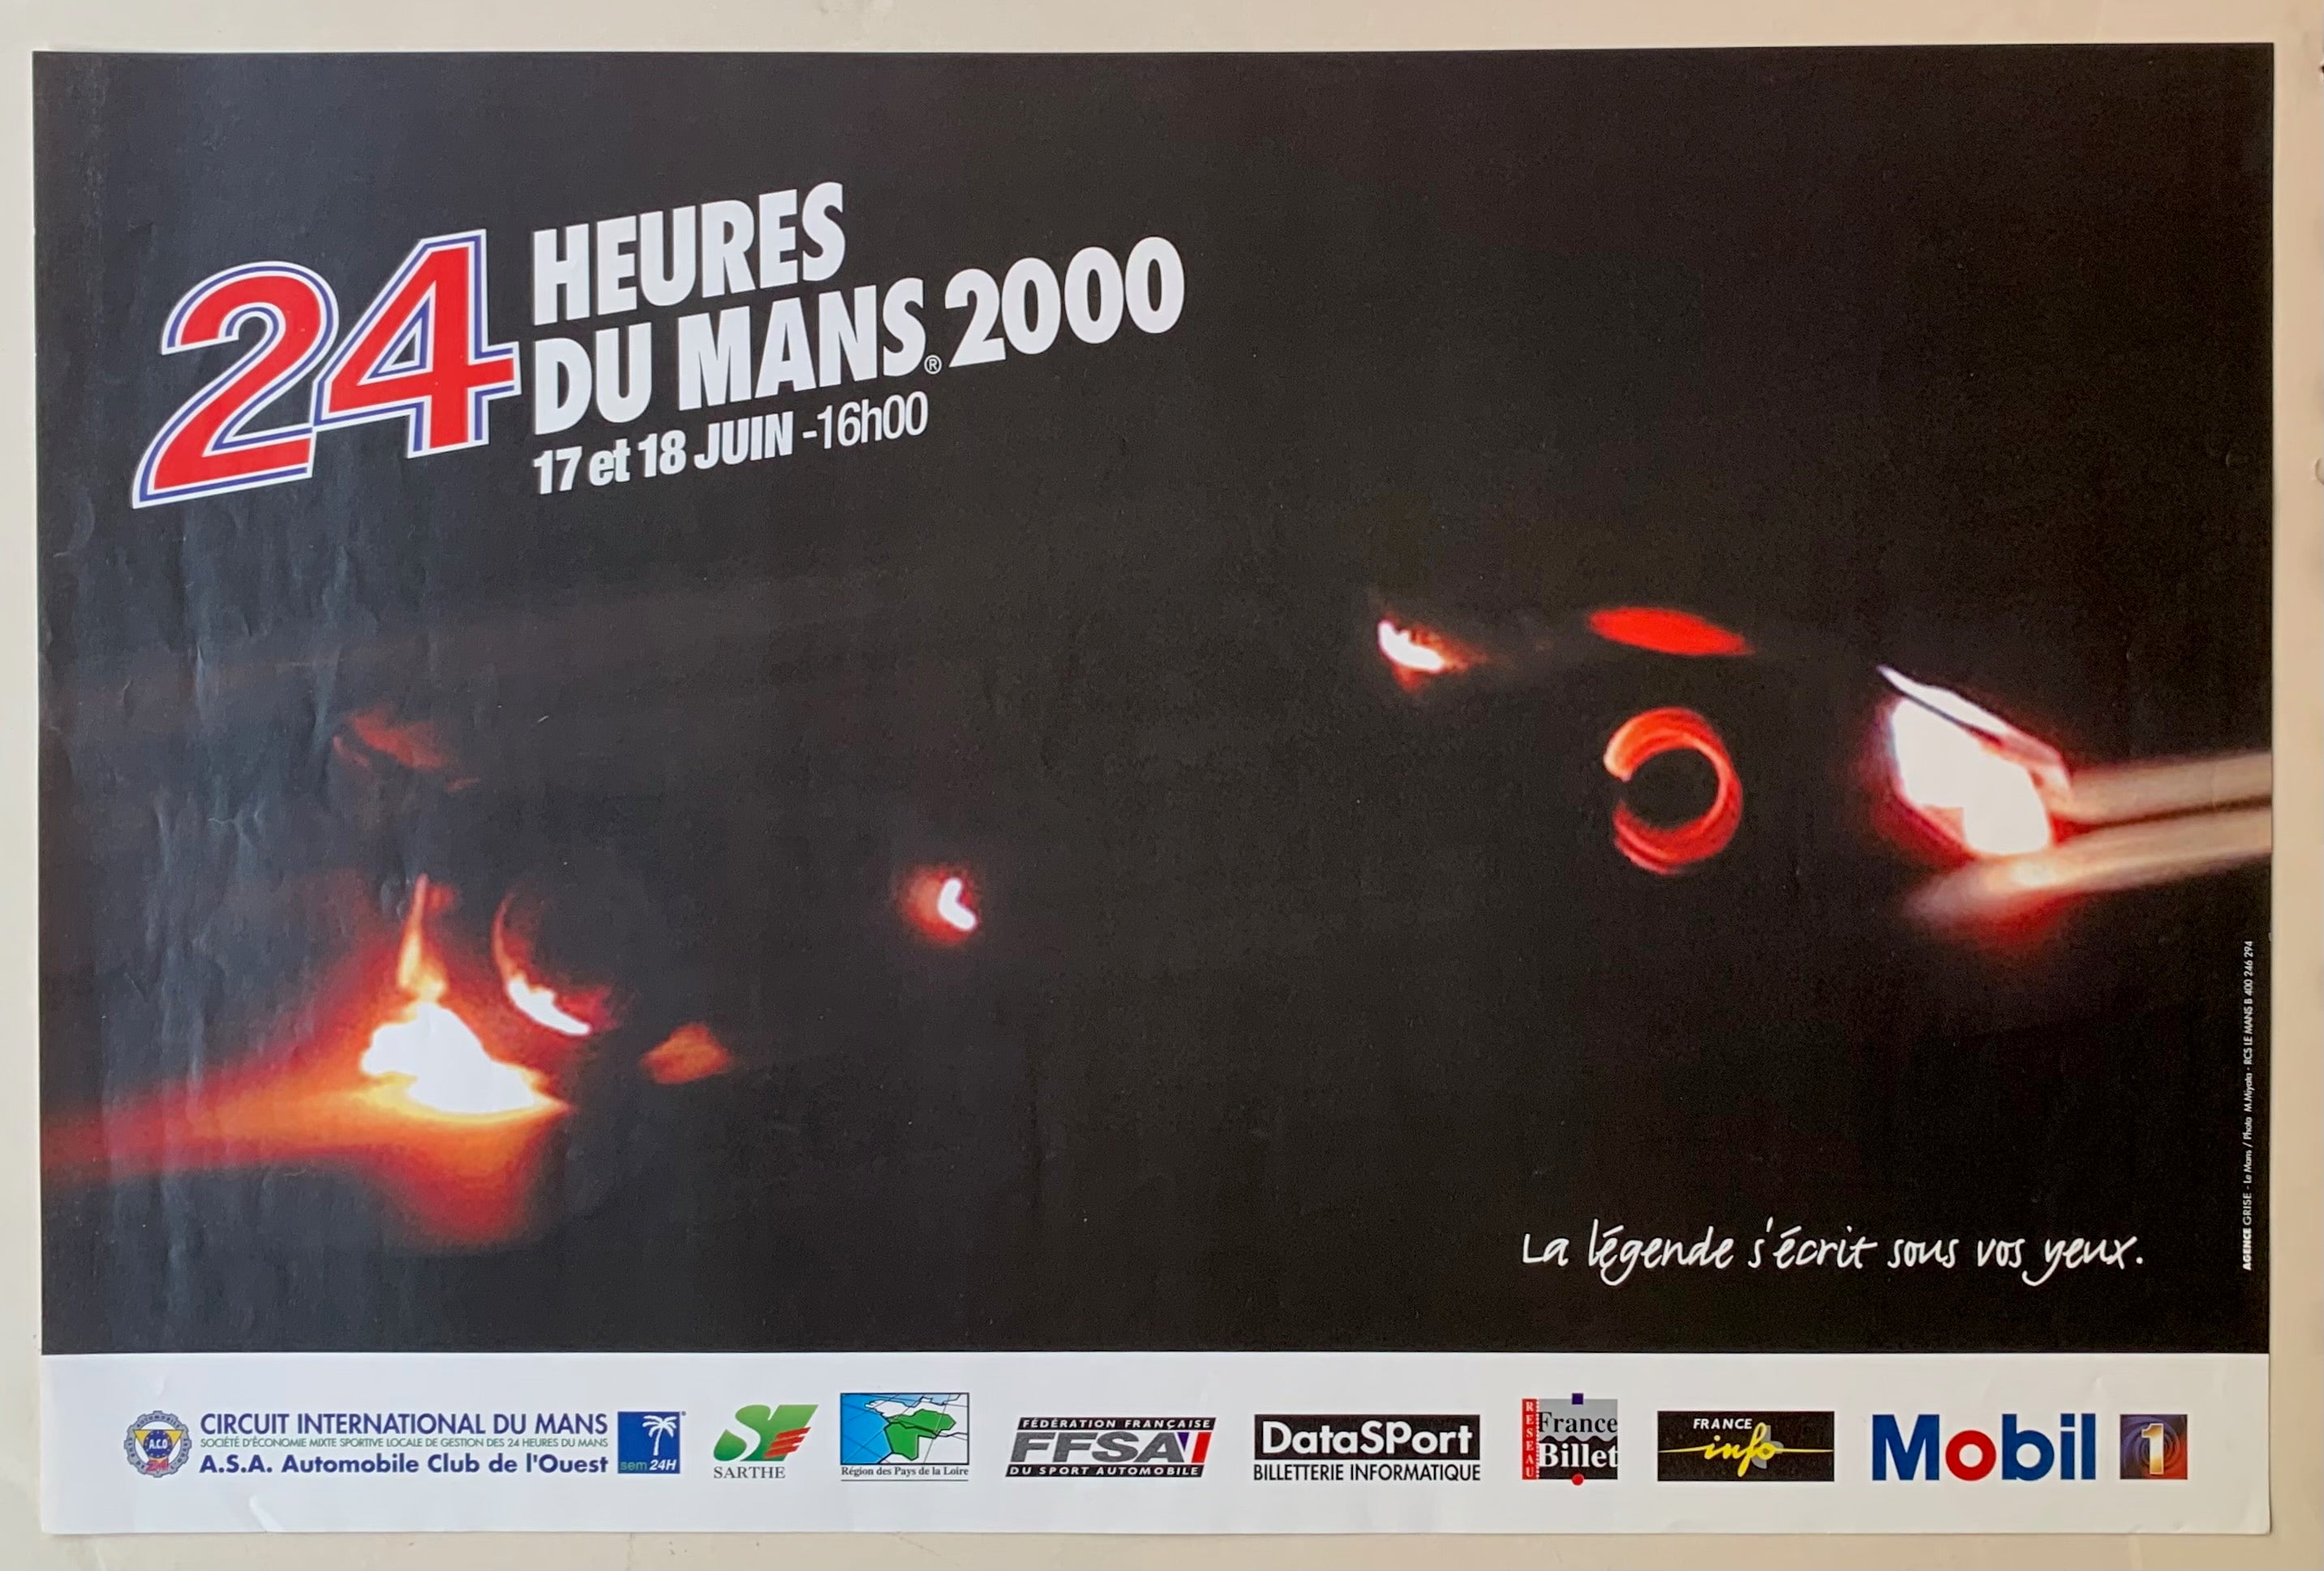 16x24 24 heures du mans 2000 poster featuring glowing red racecar in the dark and partner company logos